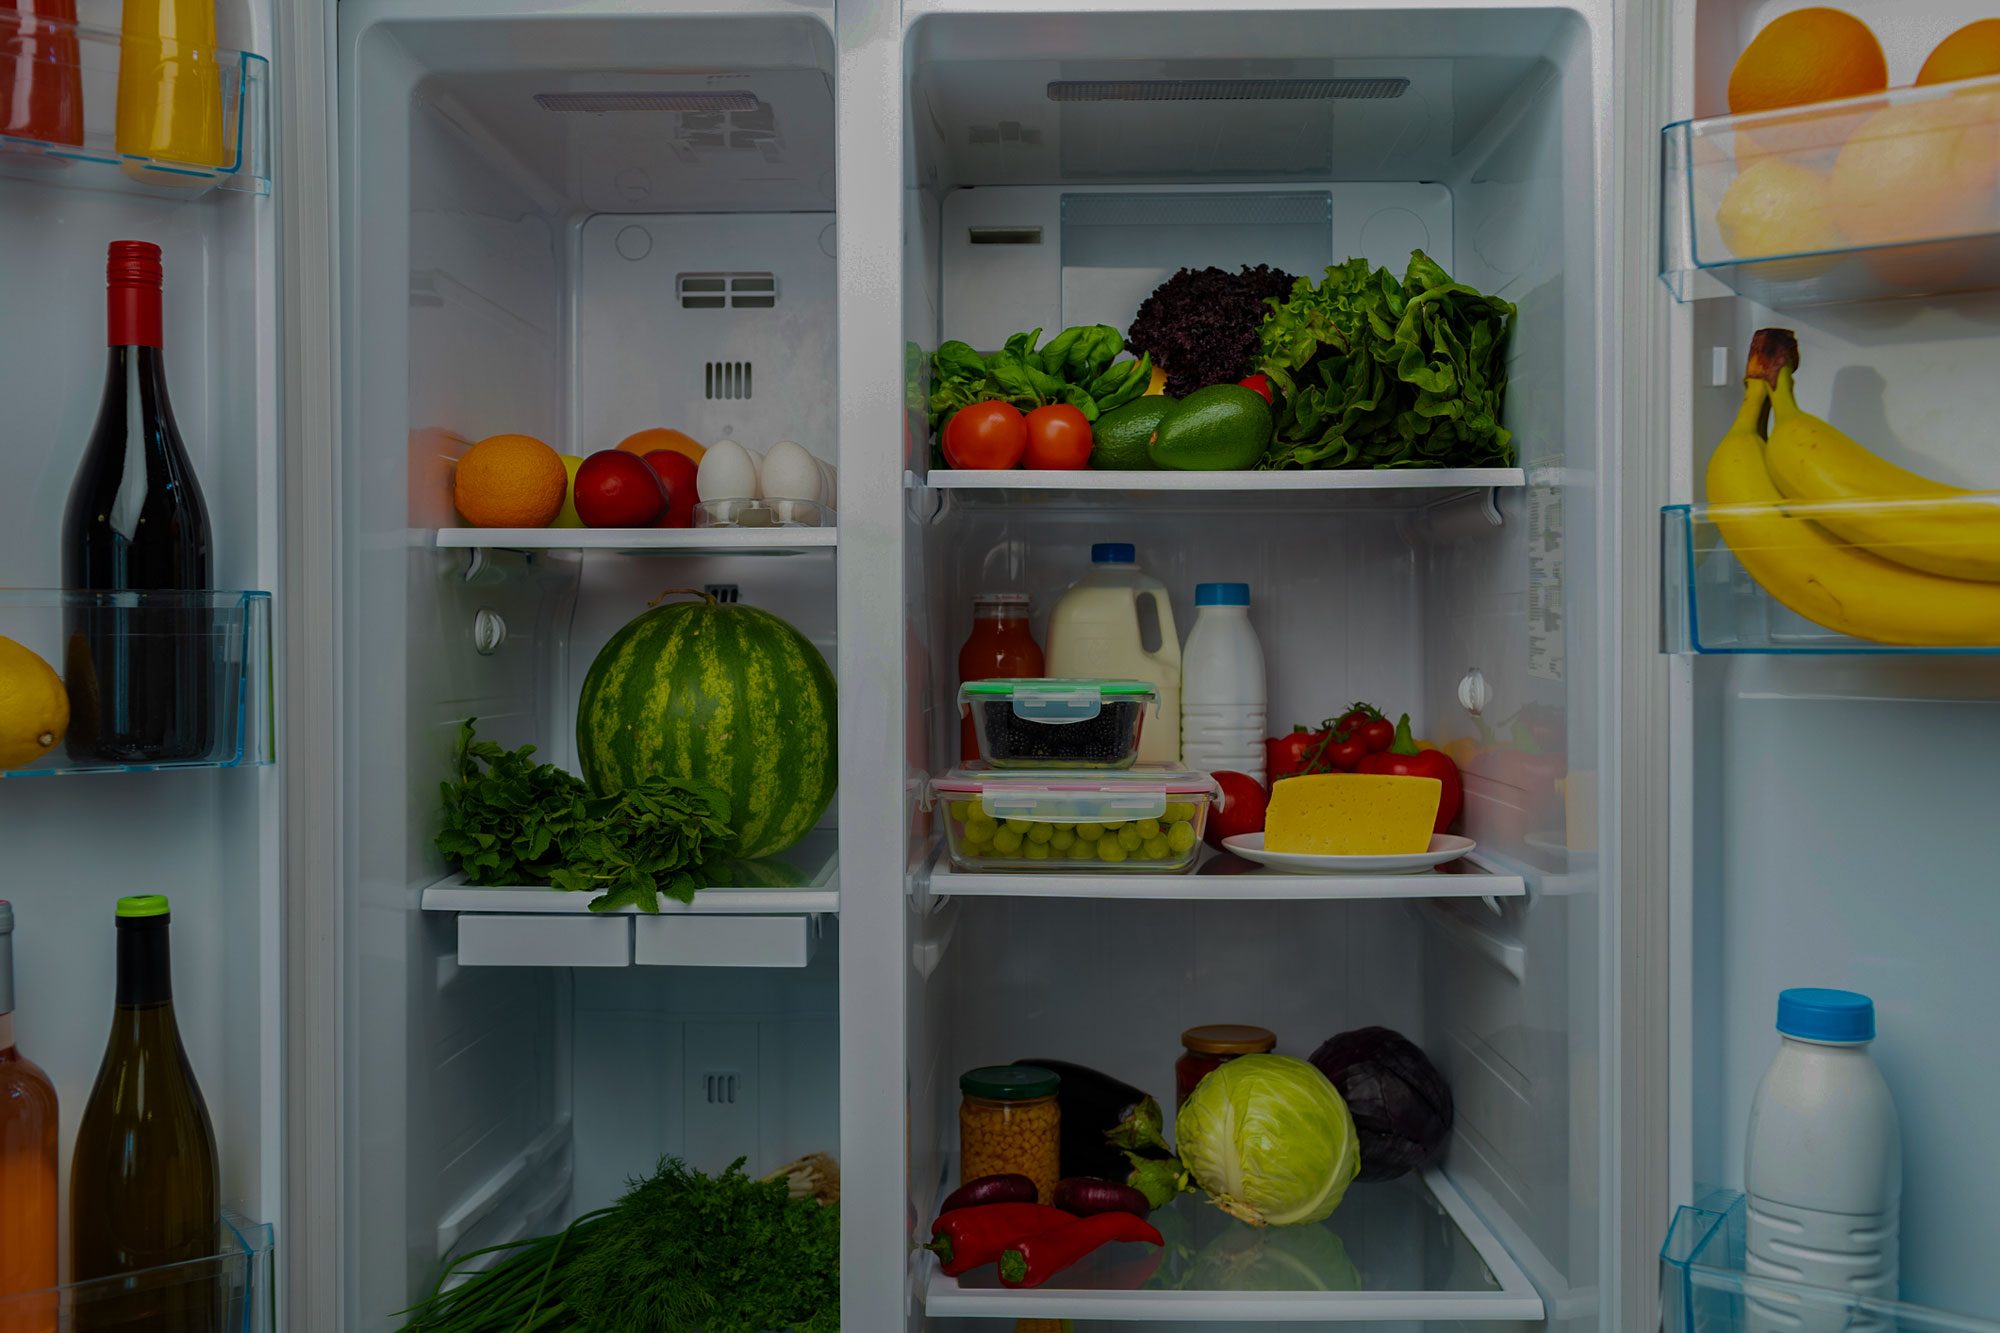 How Long Will Food Last in a Refrigerator Without Power?